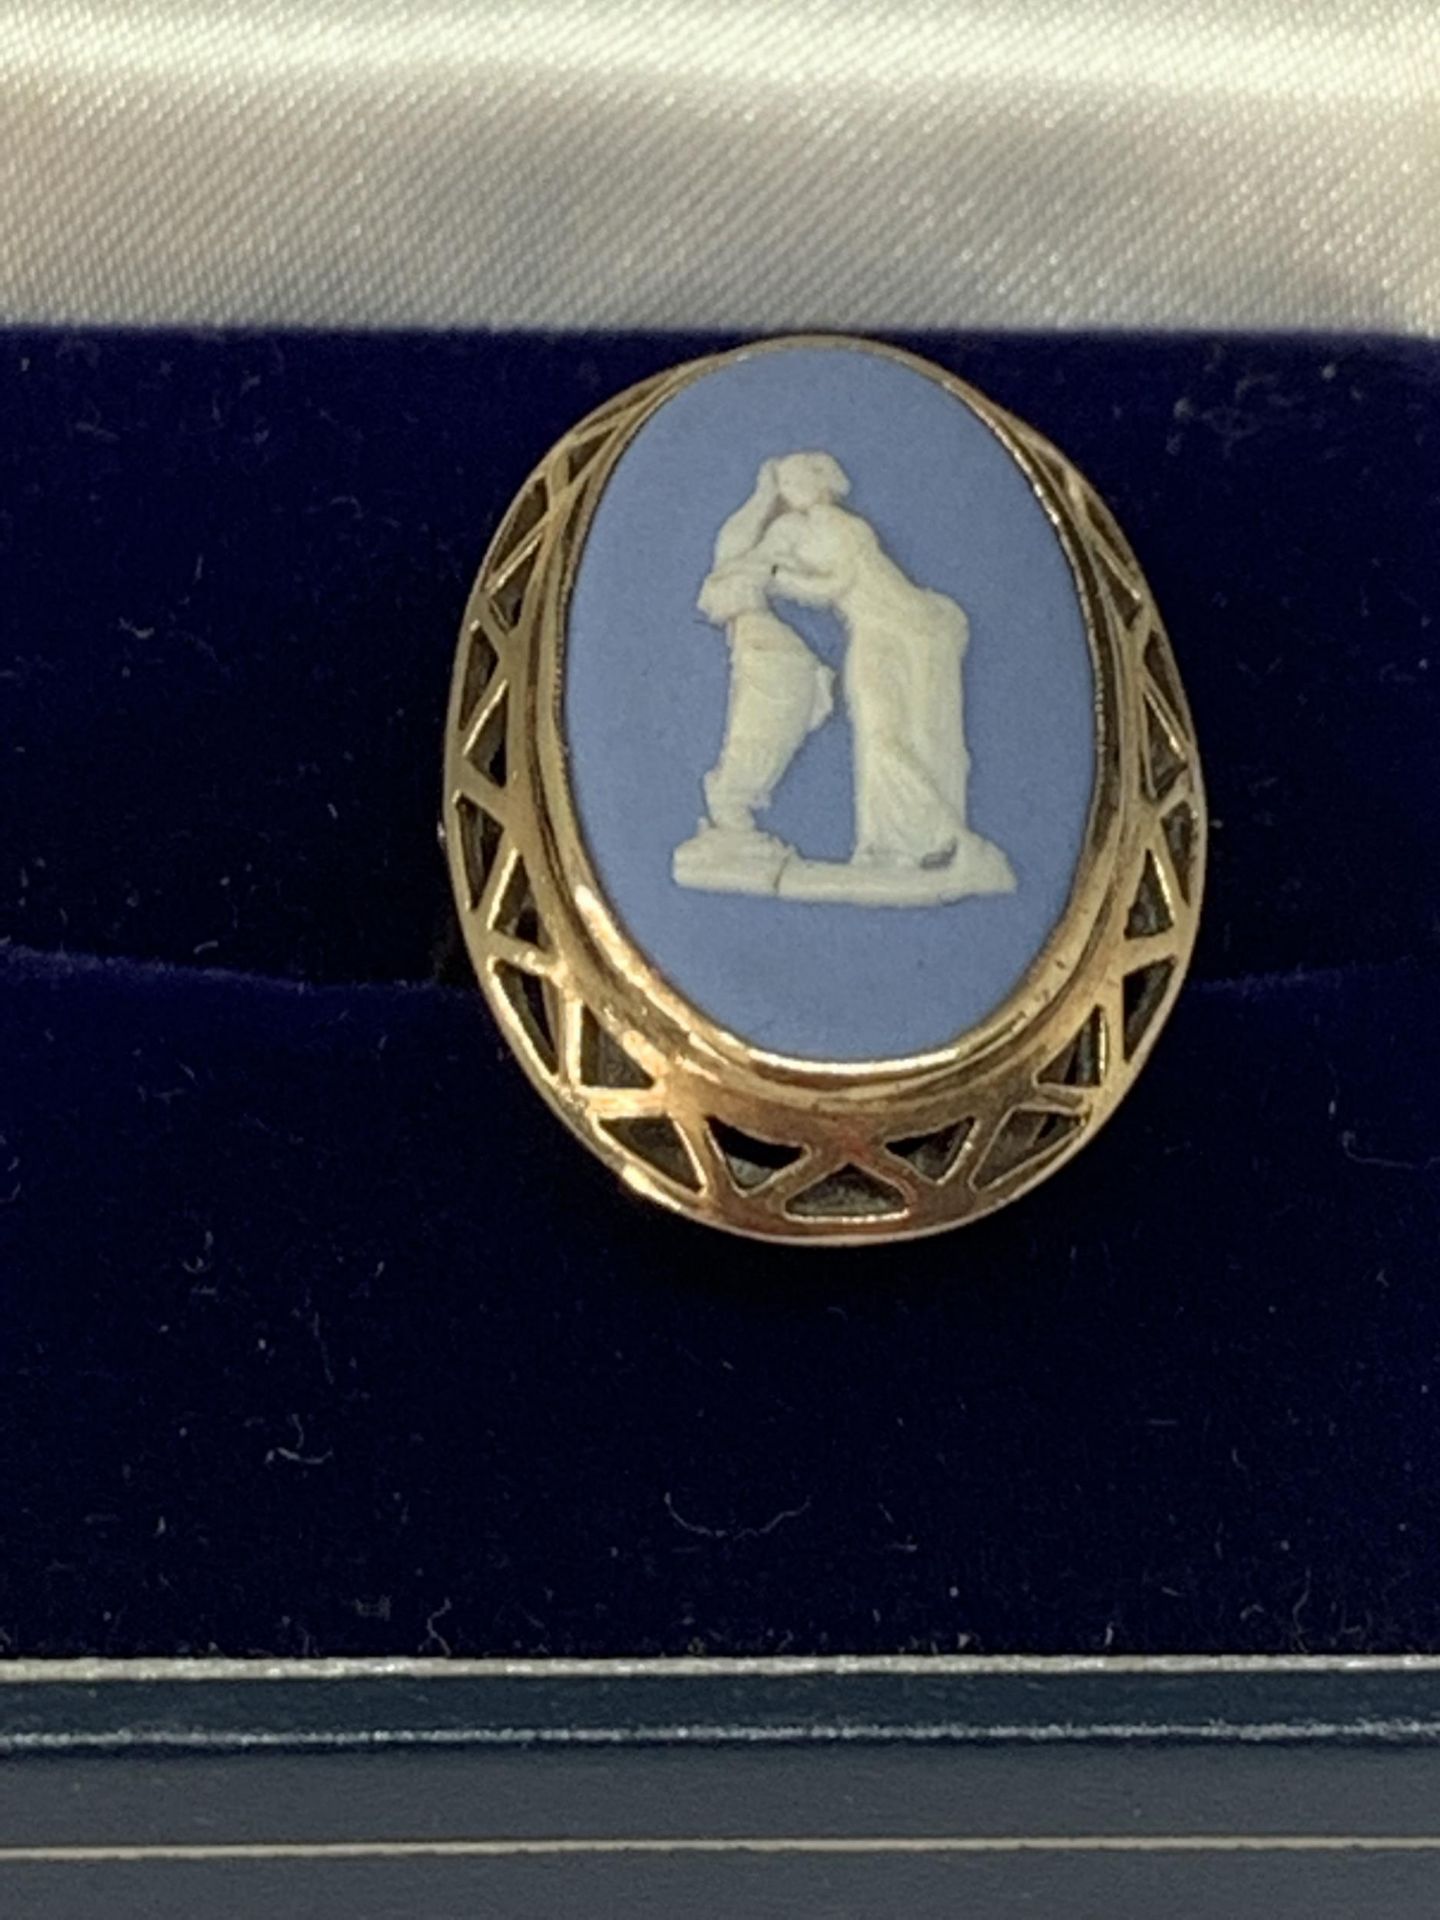 A 9 CARAT GOLD WEDGEWOOD JASPERWARE RING SIZE K/L IN A PRESENTATION BOX - Image 4 of 4